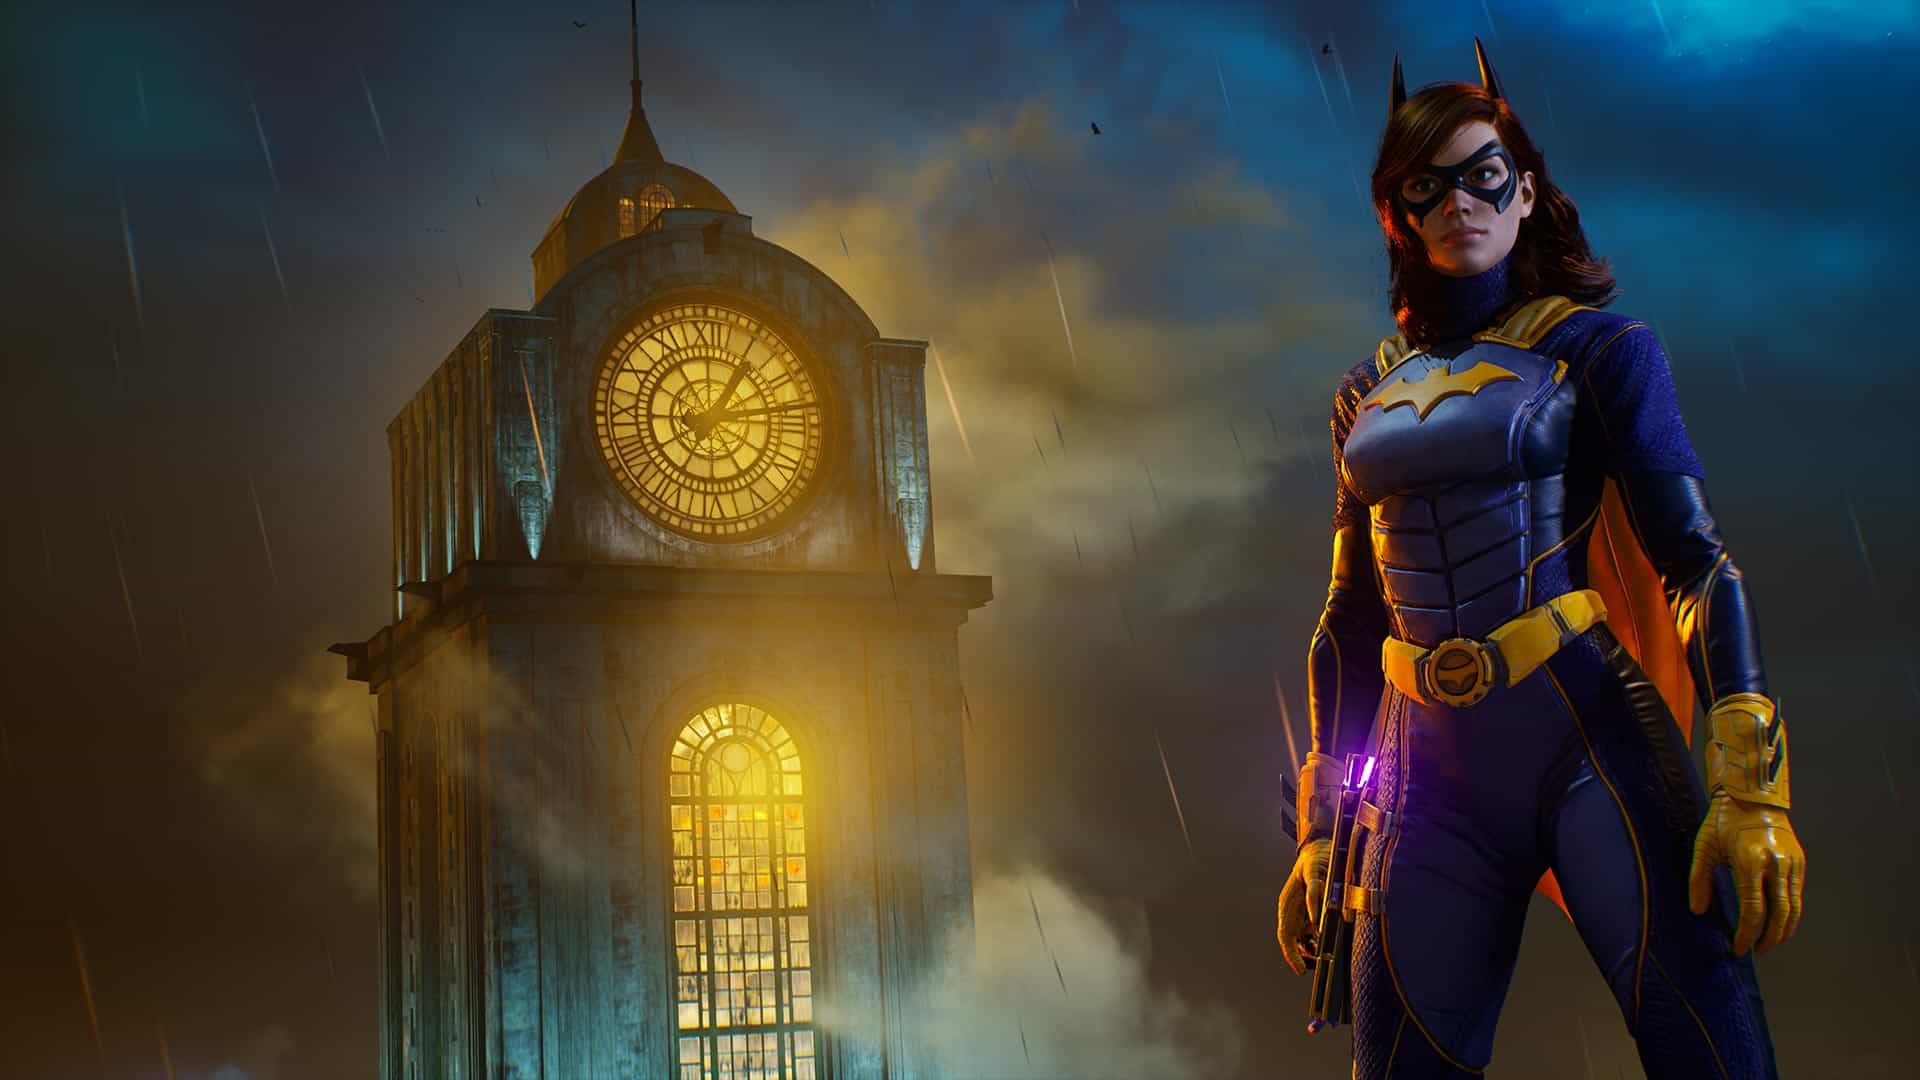 Gotham Knights co-op could be expanding to four players, according to PS Store listing